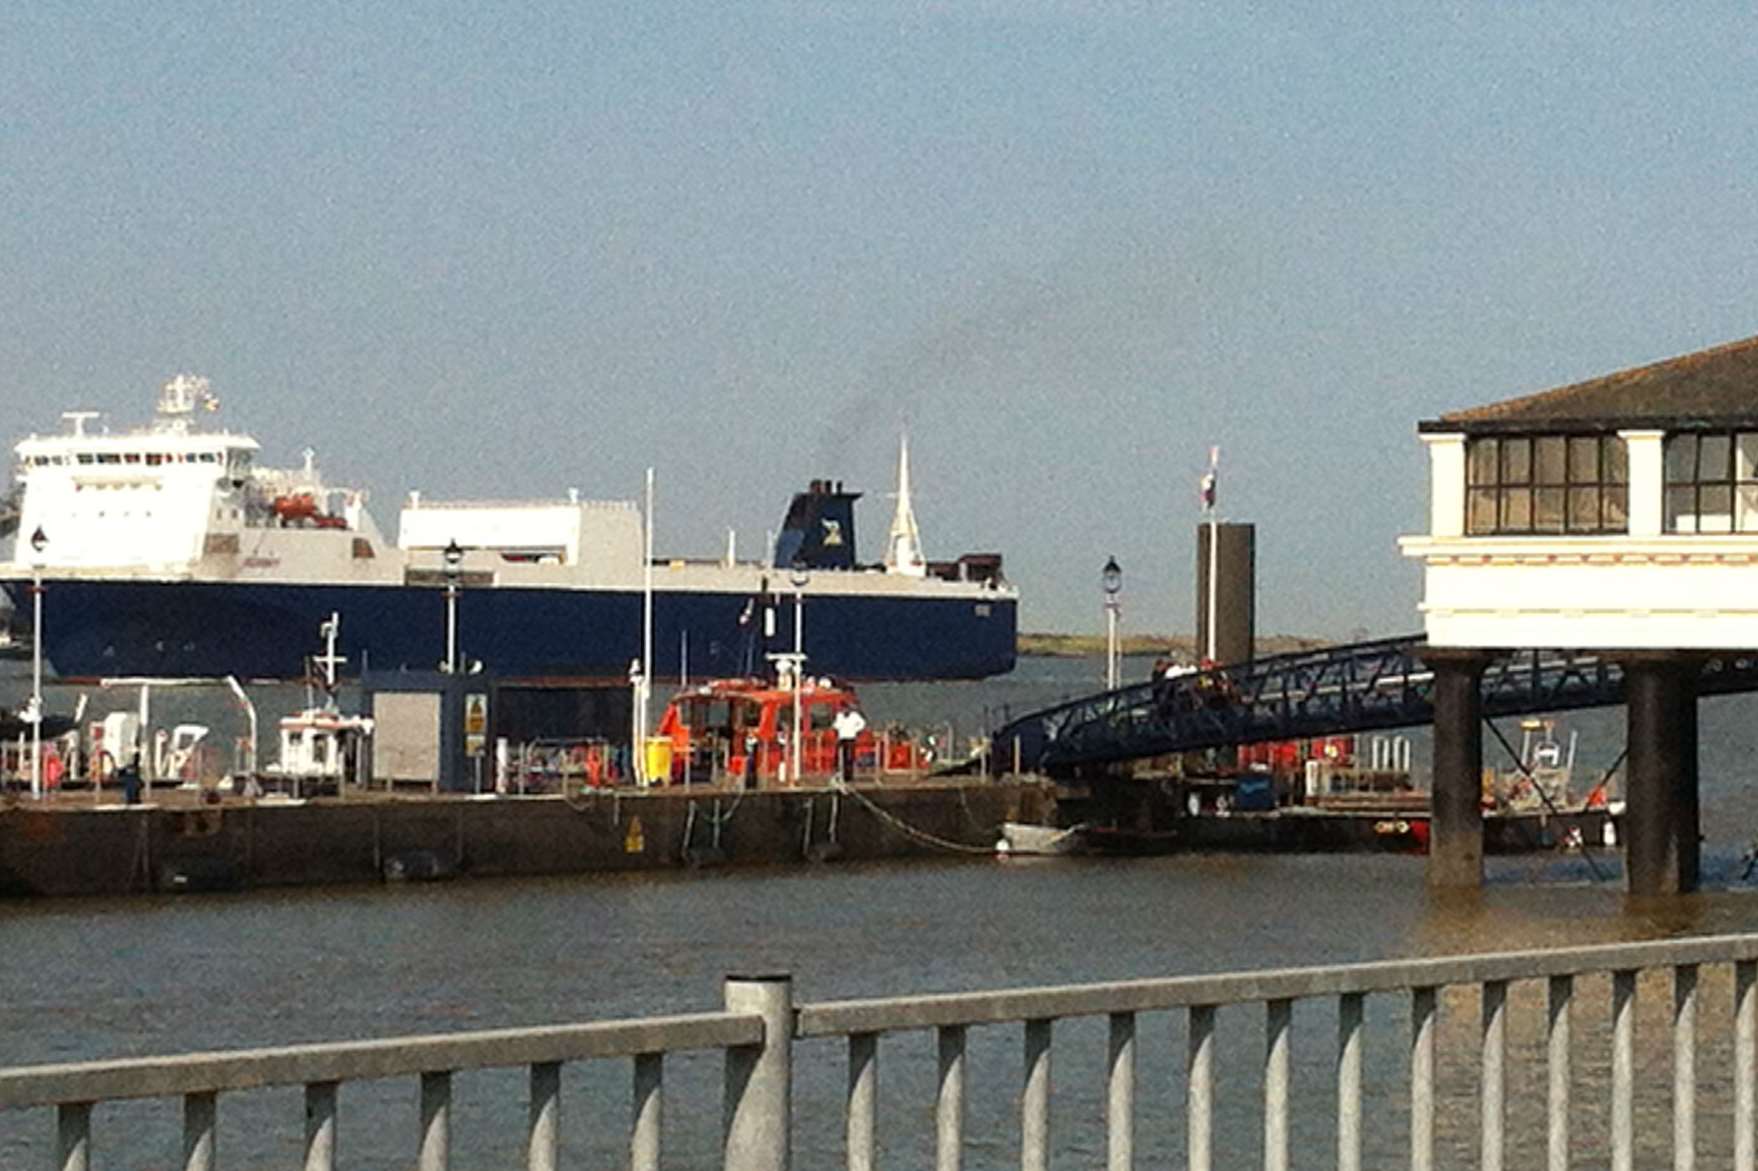 Police at the Port of London pier in Gravesend